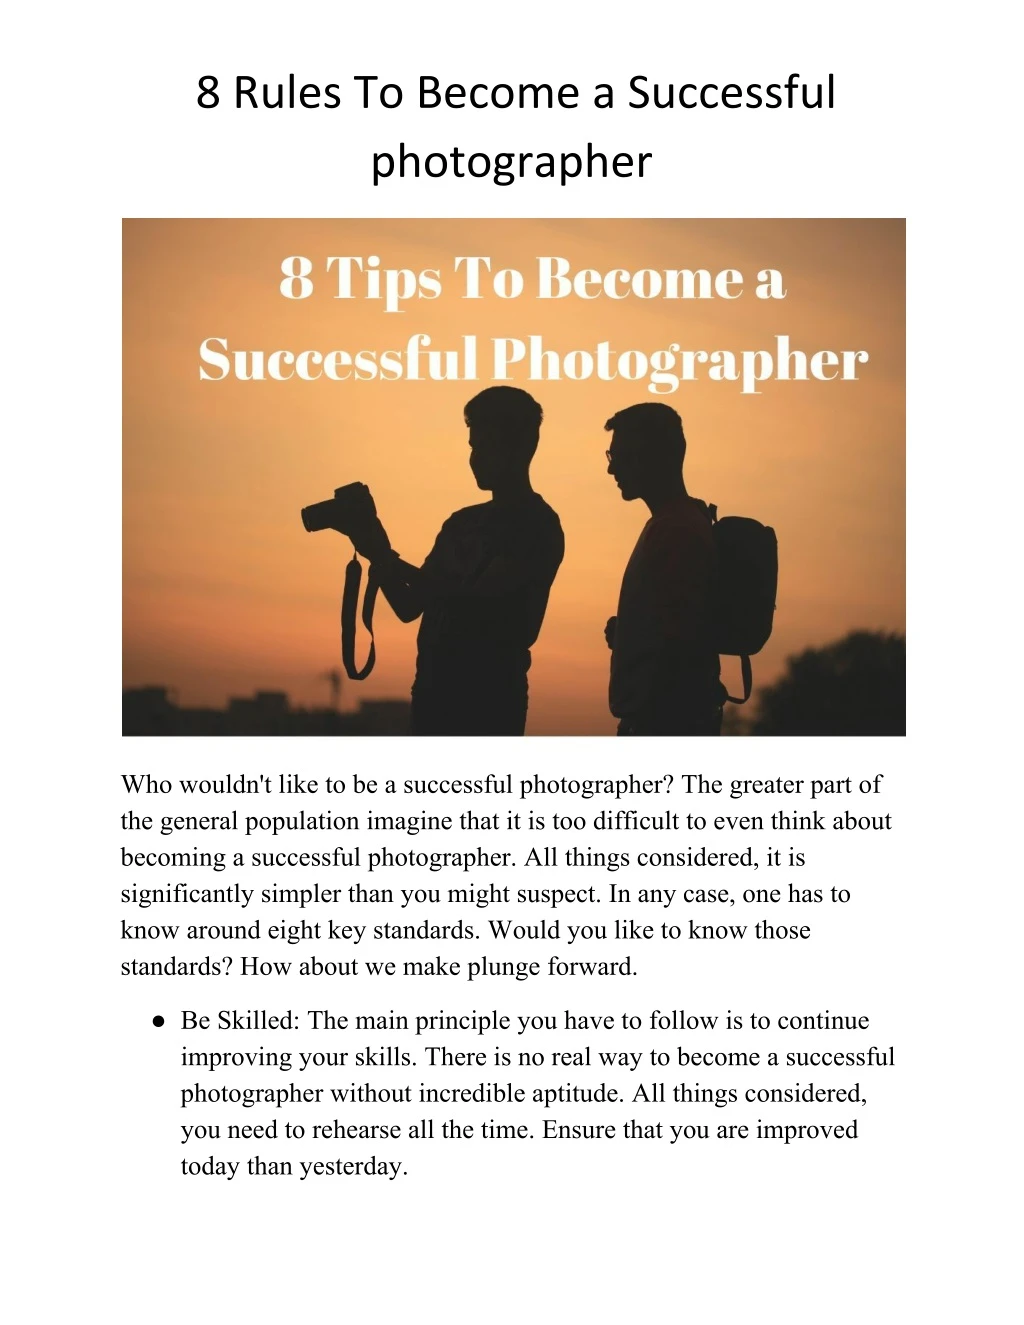 8 rules to become a successful photographer